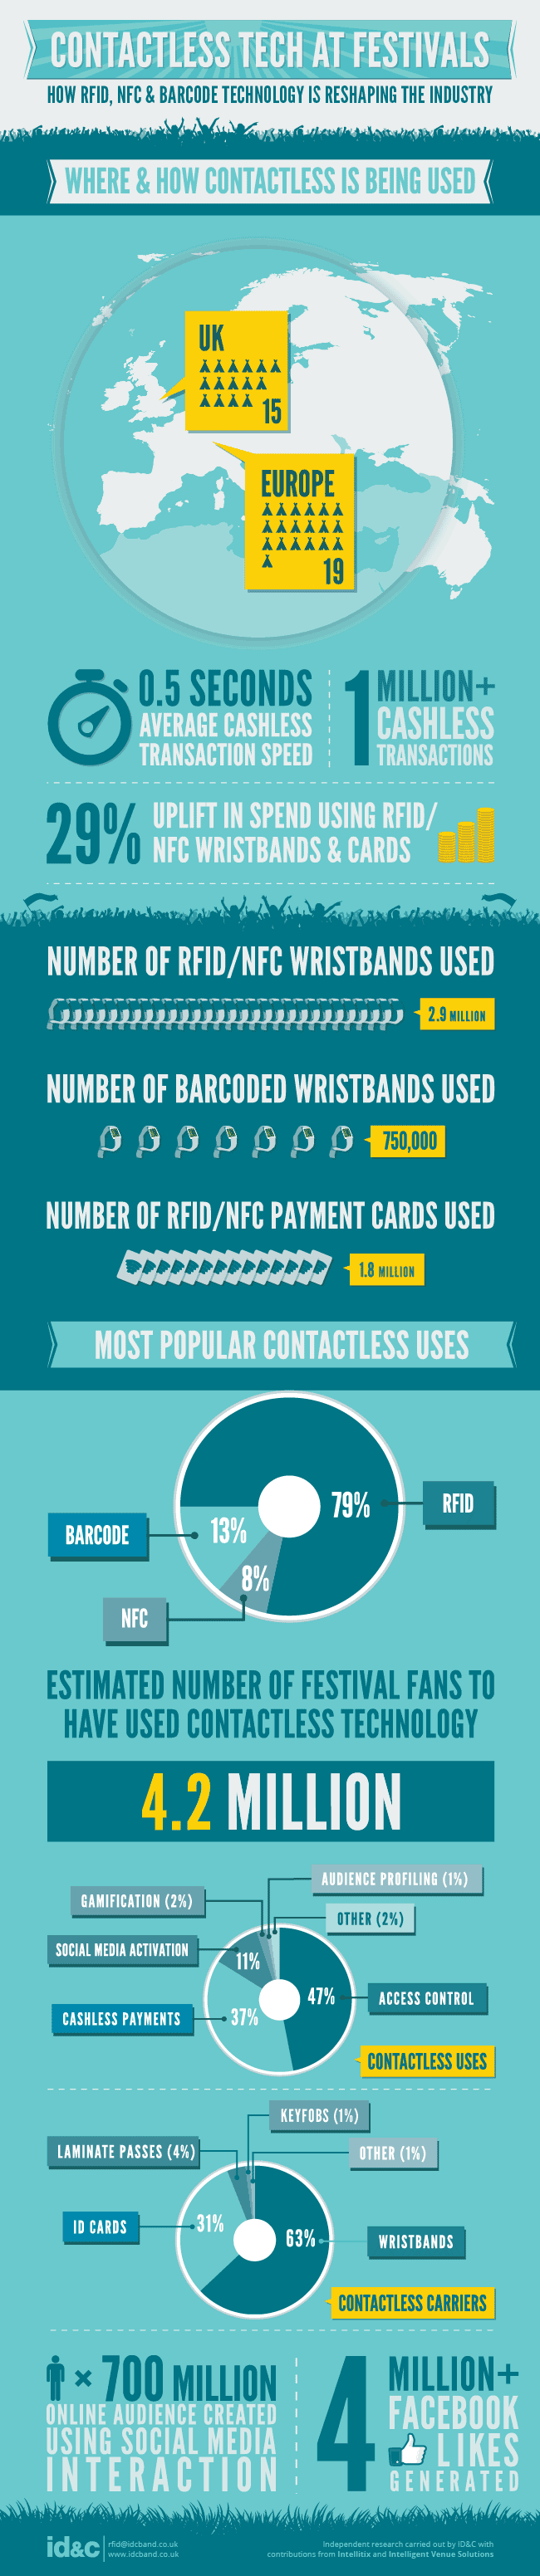 Contactless Tech at Festivals Infographic